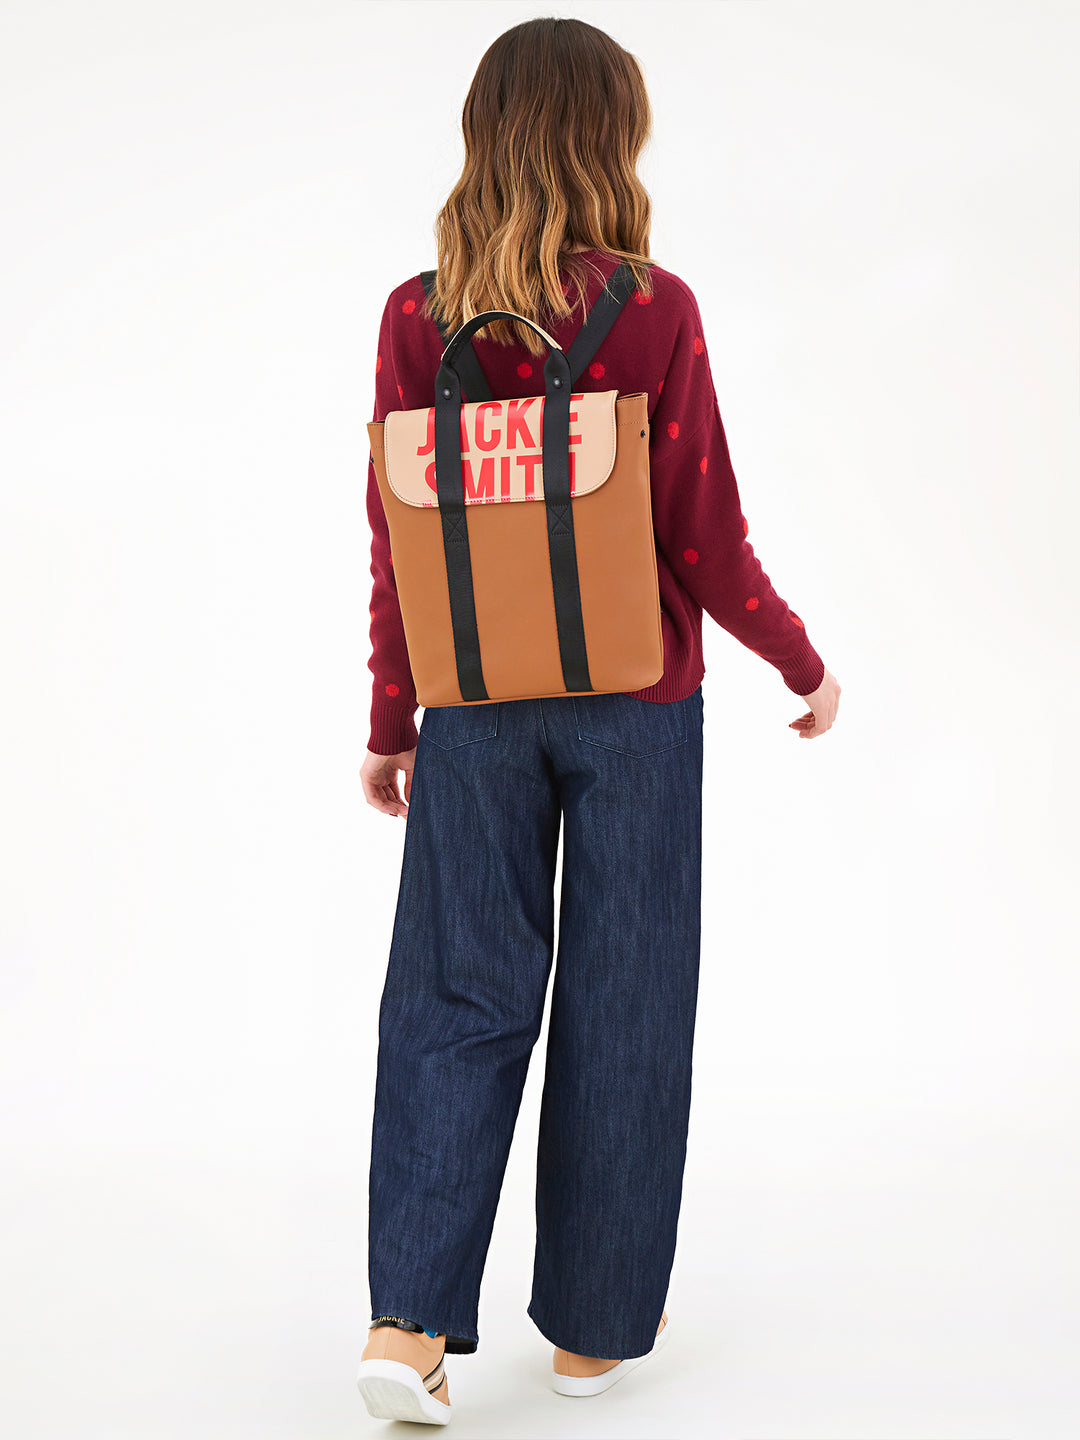 Thelma Backpack